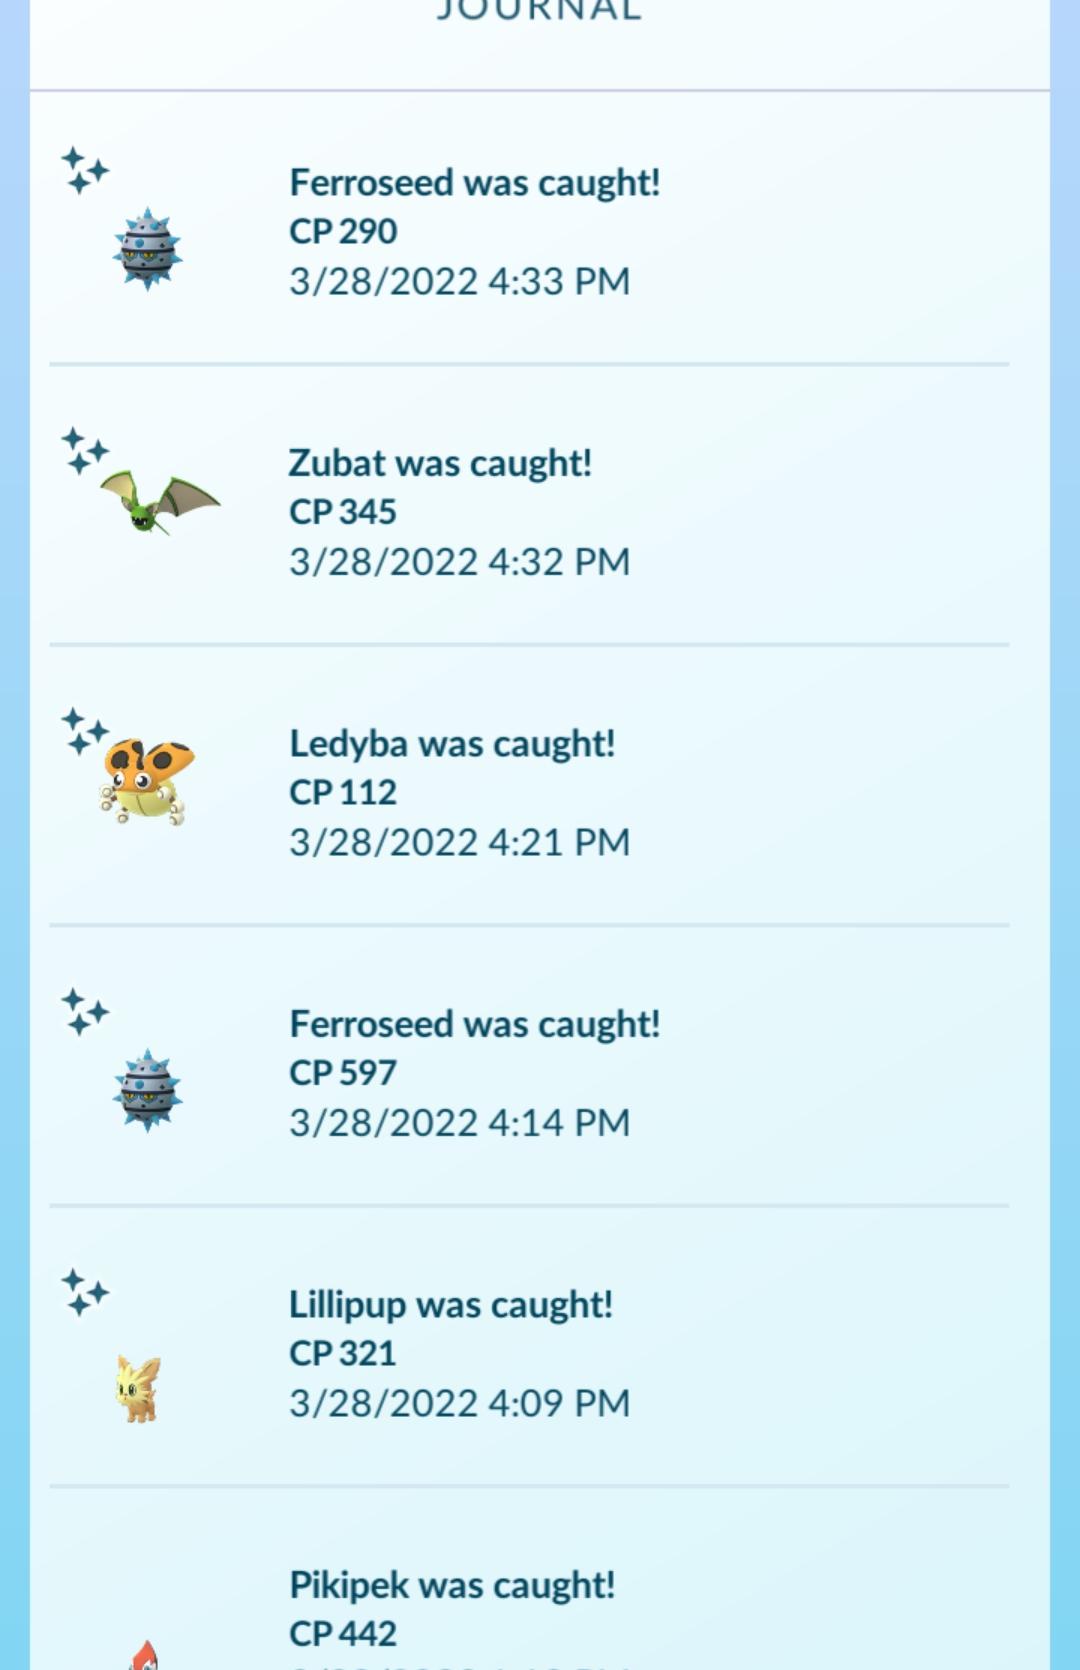 5 shinies in less than 30 minutes